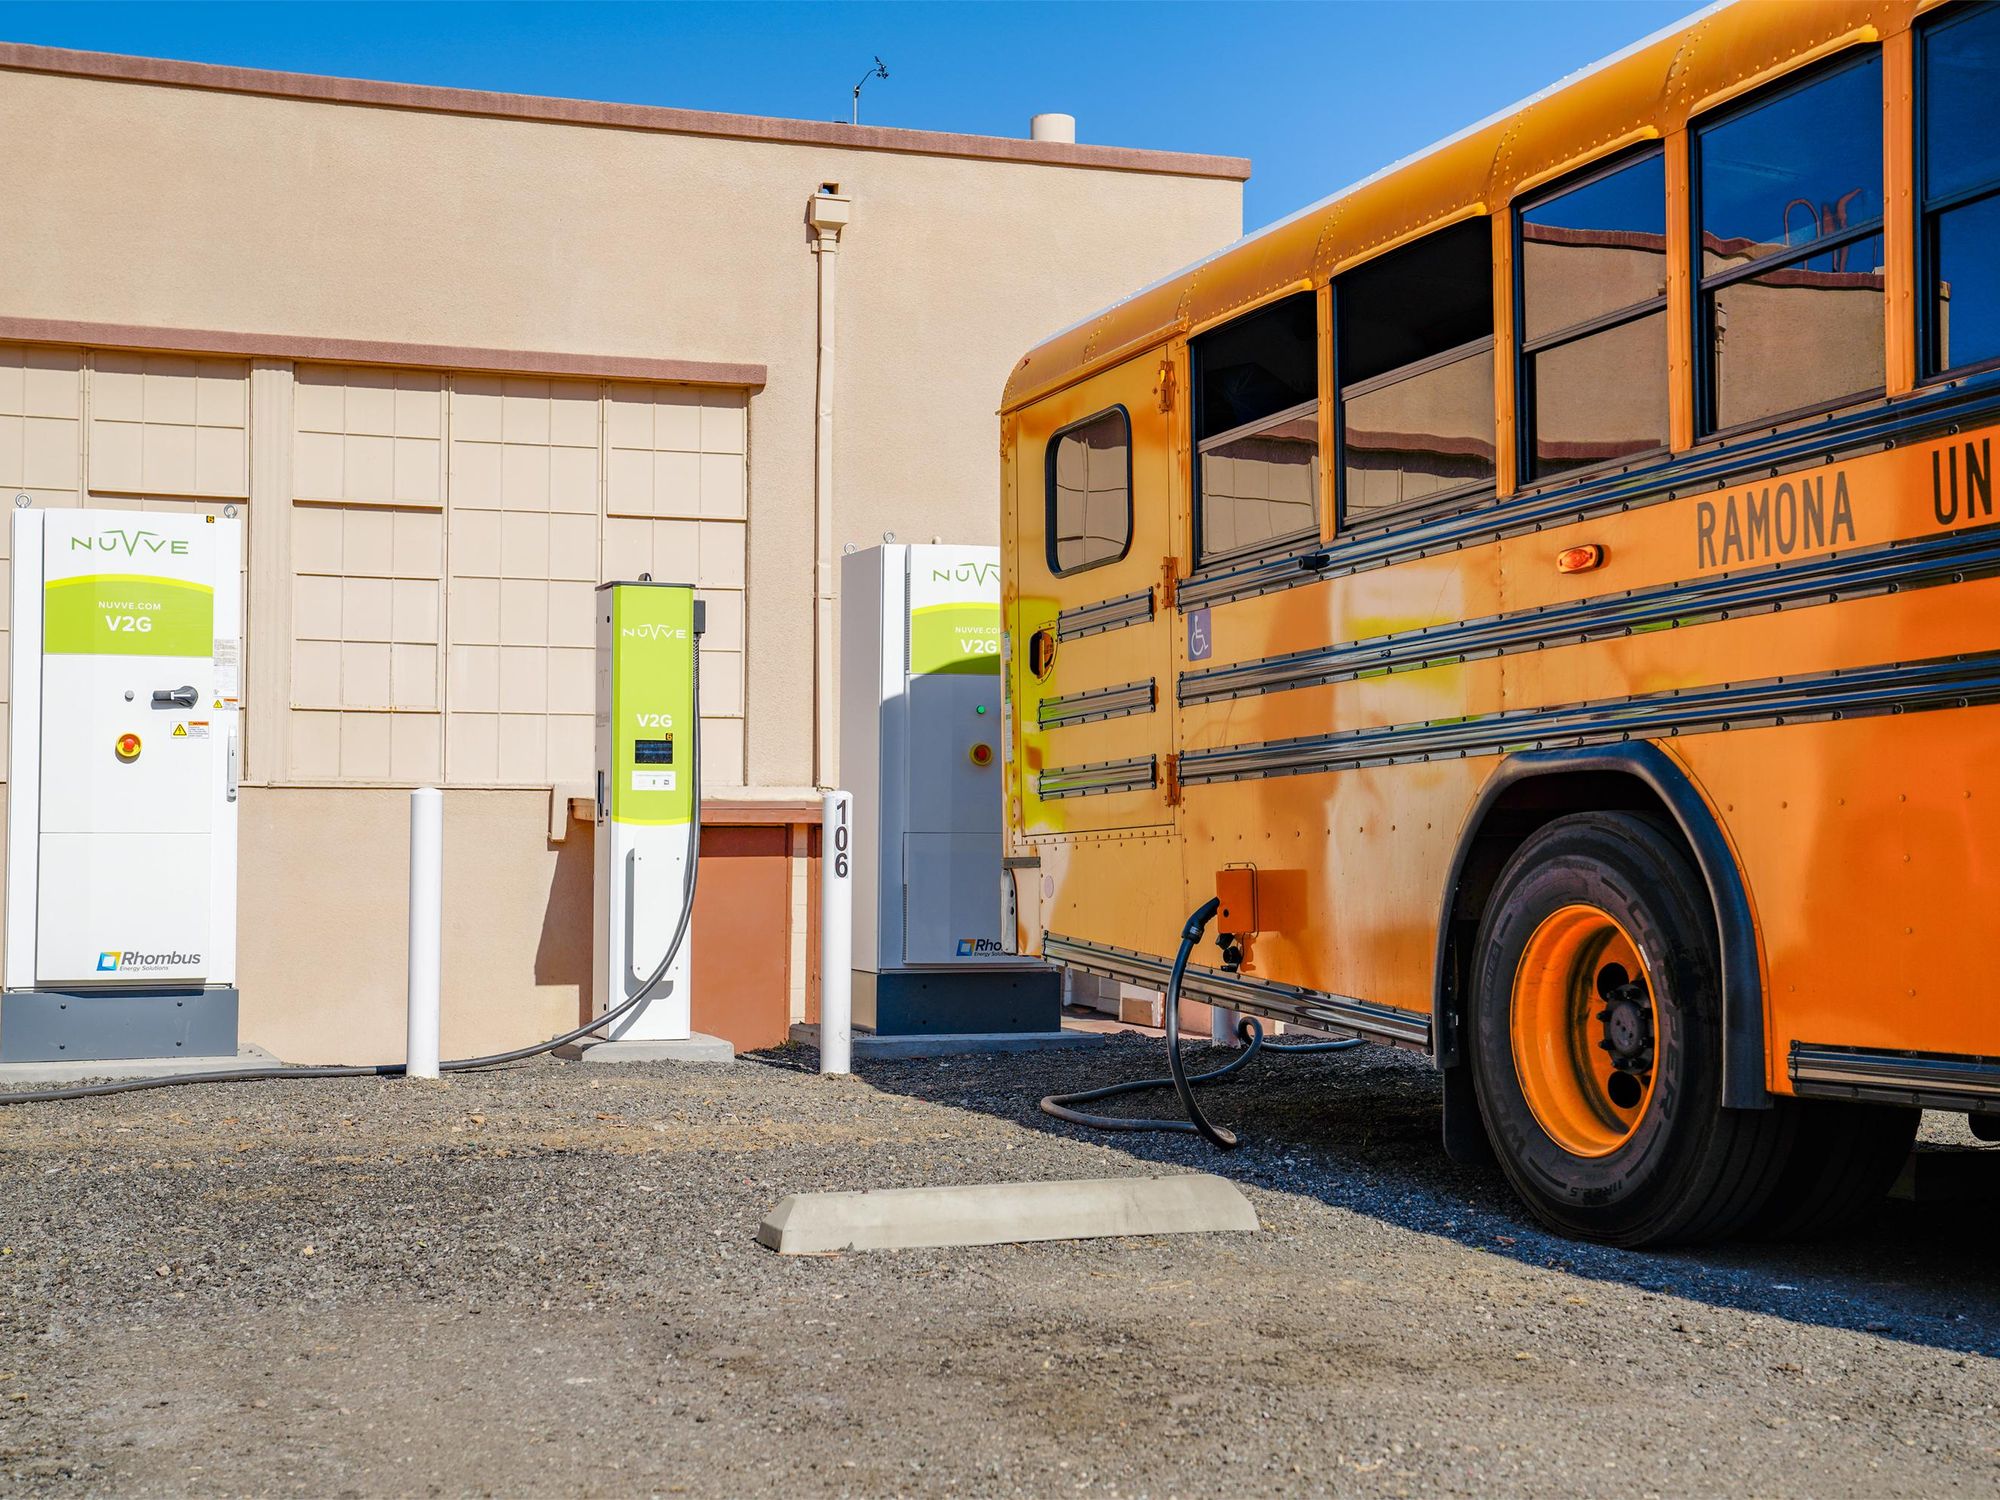 Are EV School Buses the Key to Charging California’s Power Grid?